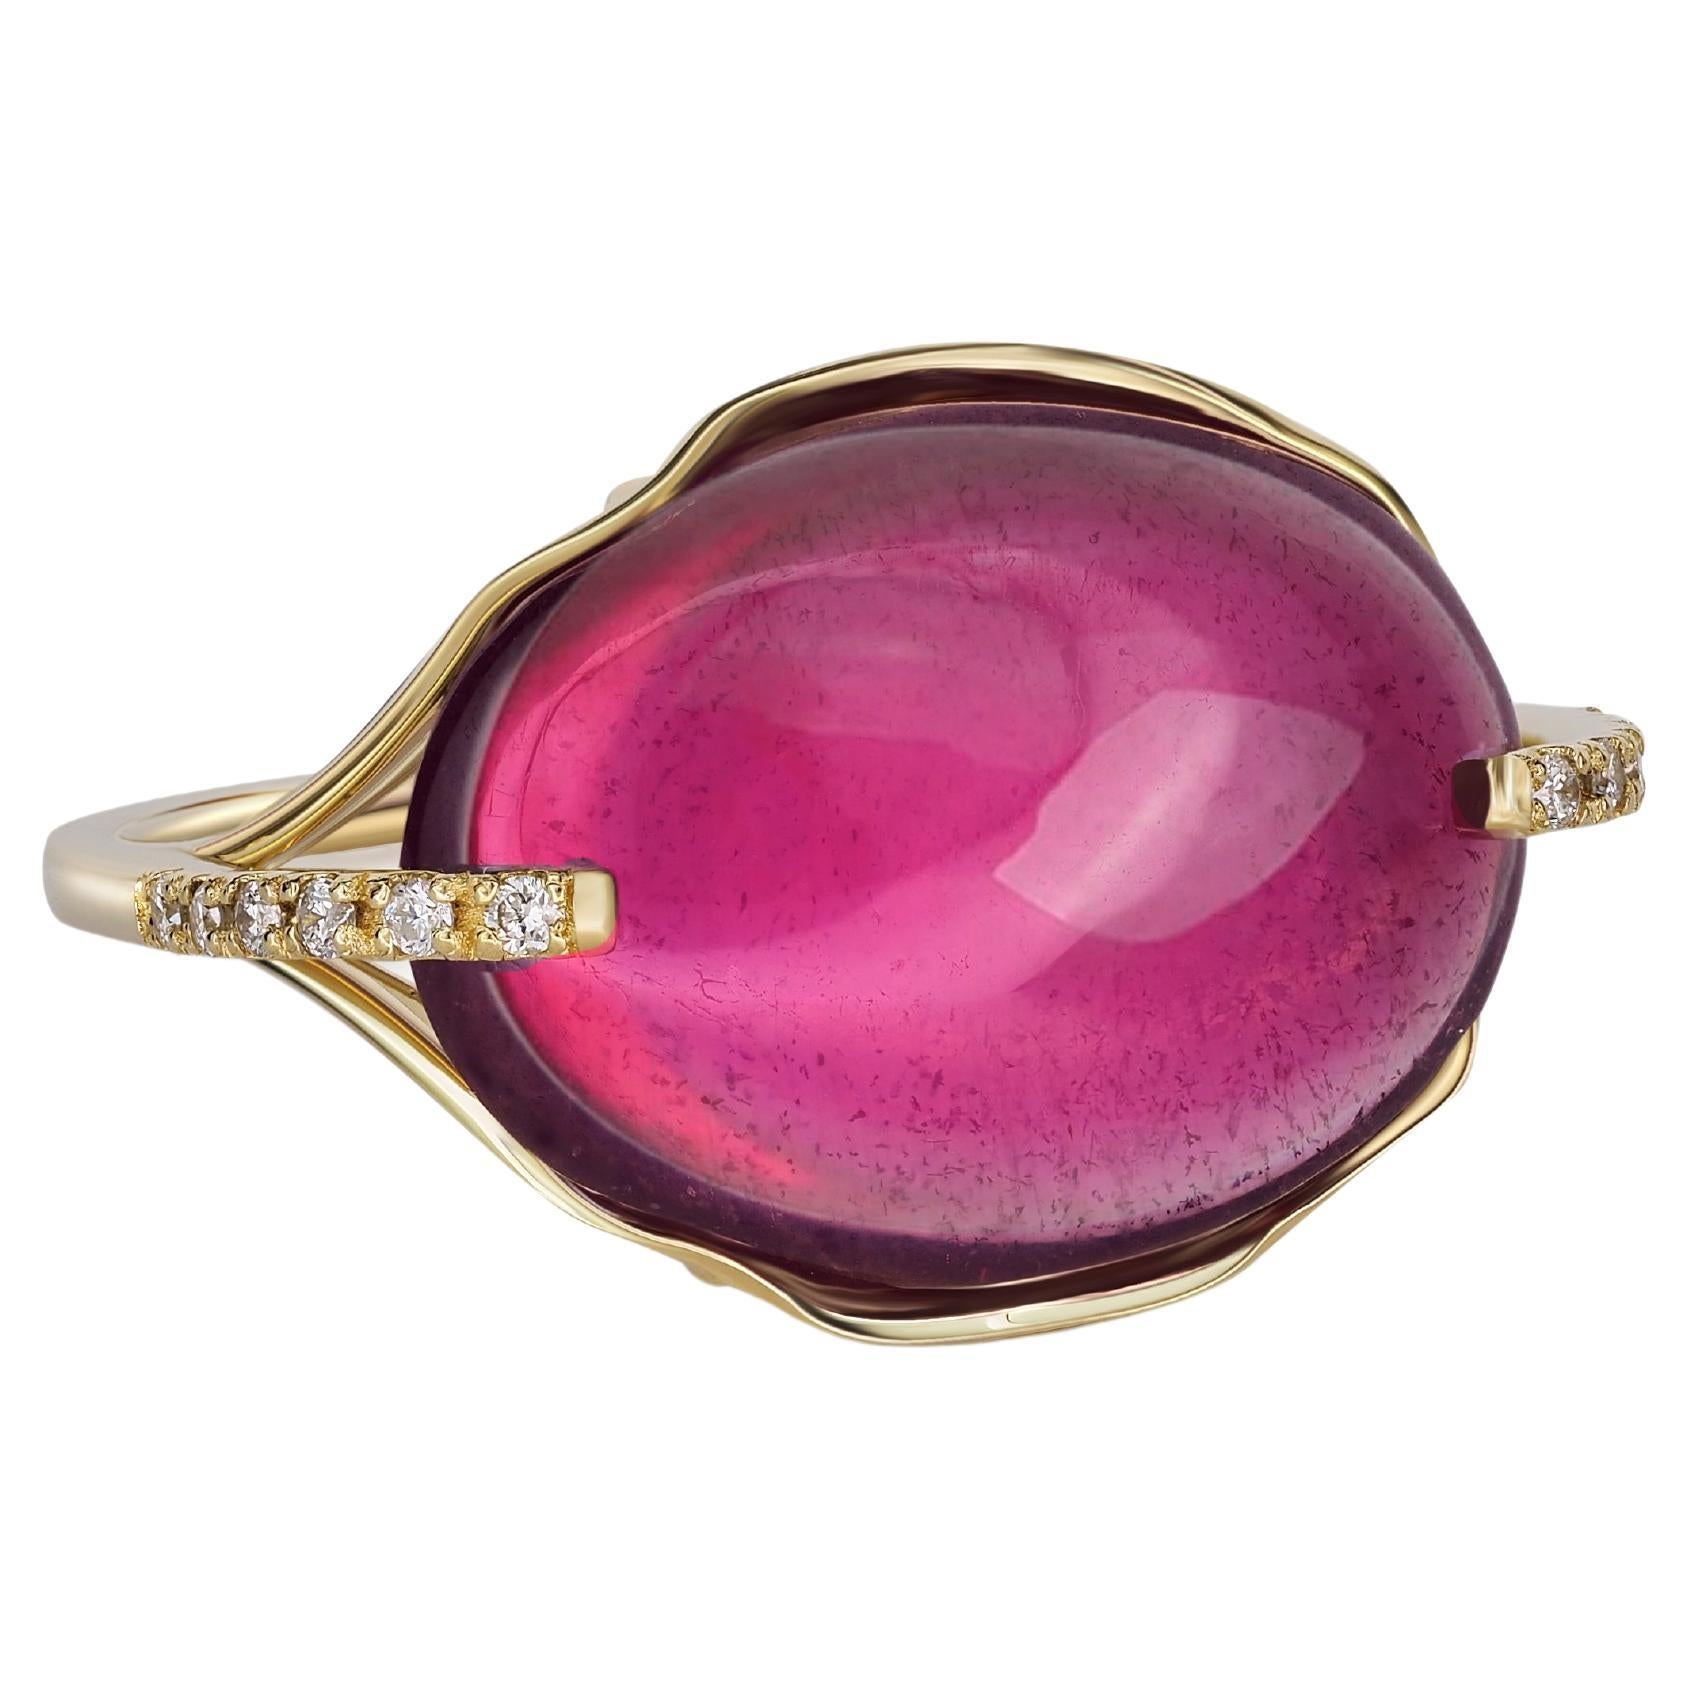 14 Karat Gold Ring with Cabochon Ruby and Diamonds, Cabochon Genuine Ruby Ring